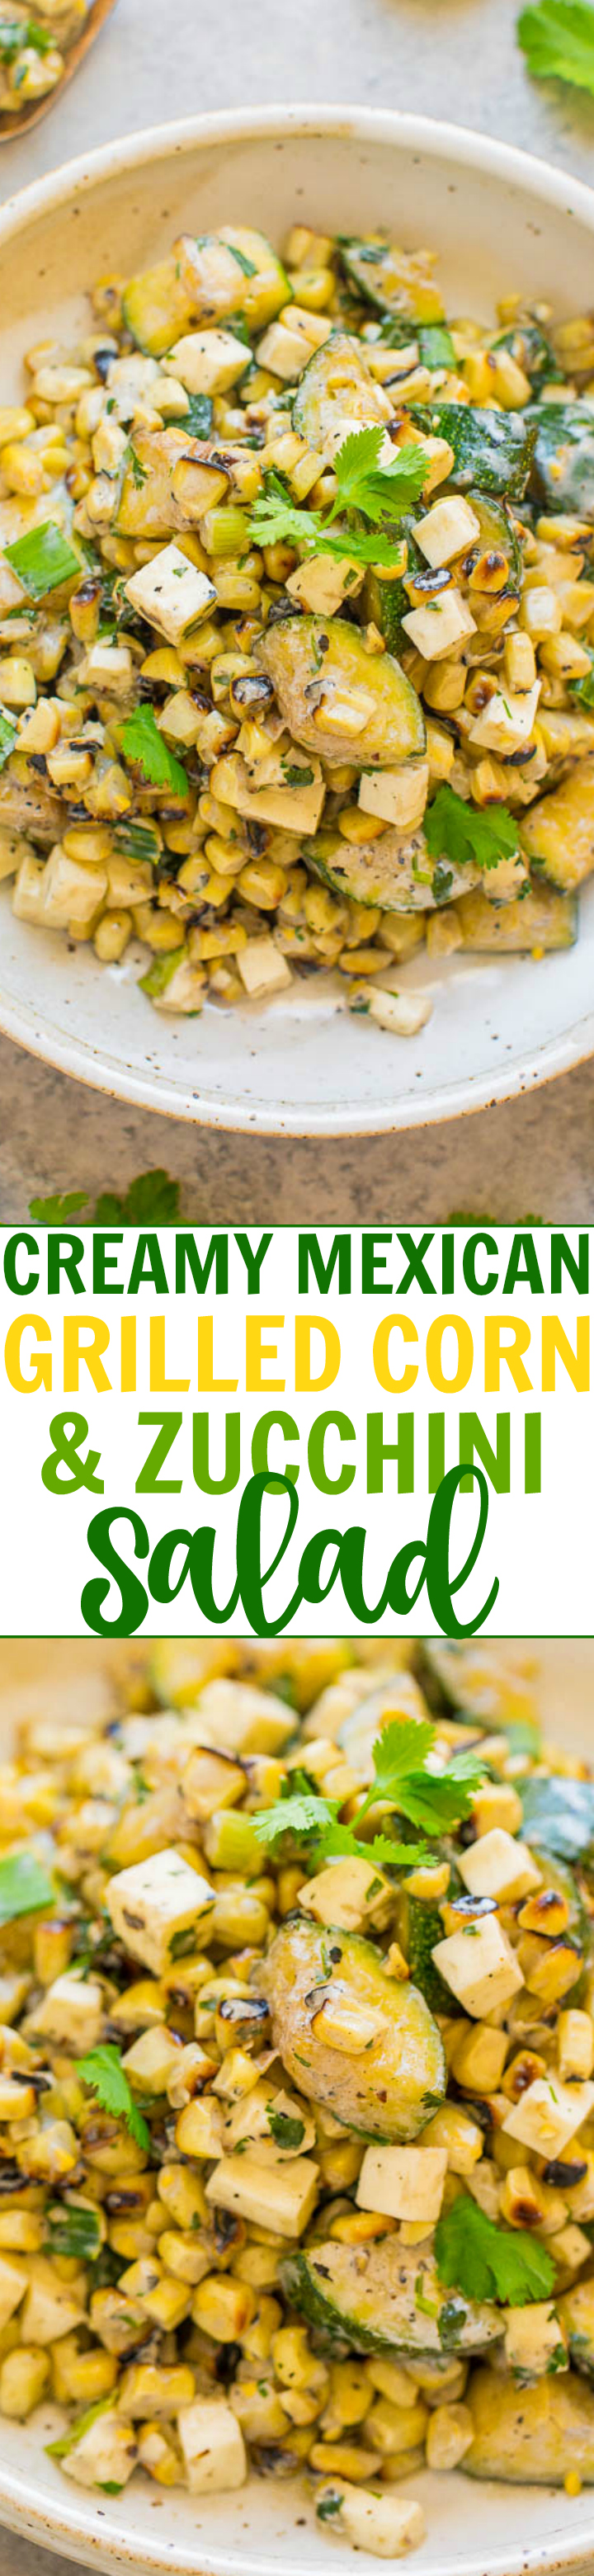 Creamy Mexican Grilled Corn and Zucchini Salad - A healthy EASY salad that's ready in 15 minutes and so flavorful!! Corn, zucchini, cilantro, queso fresco and more are tossed in a DELISH creamy lime sauce!!